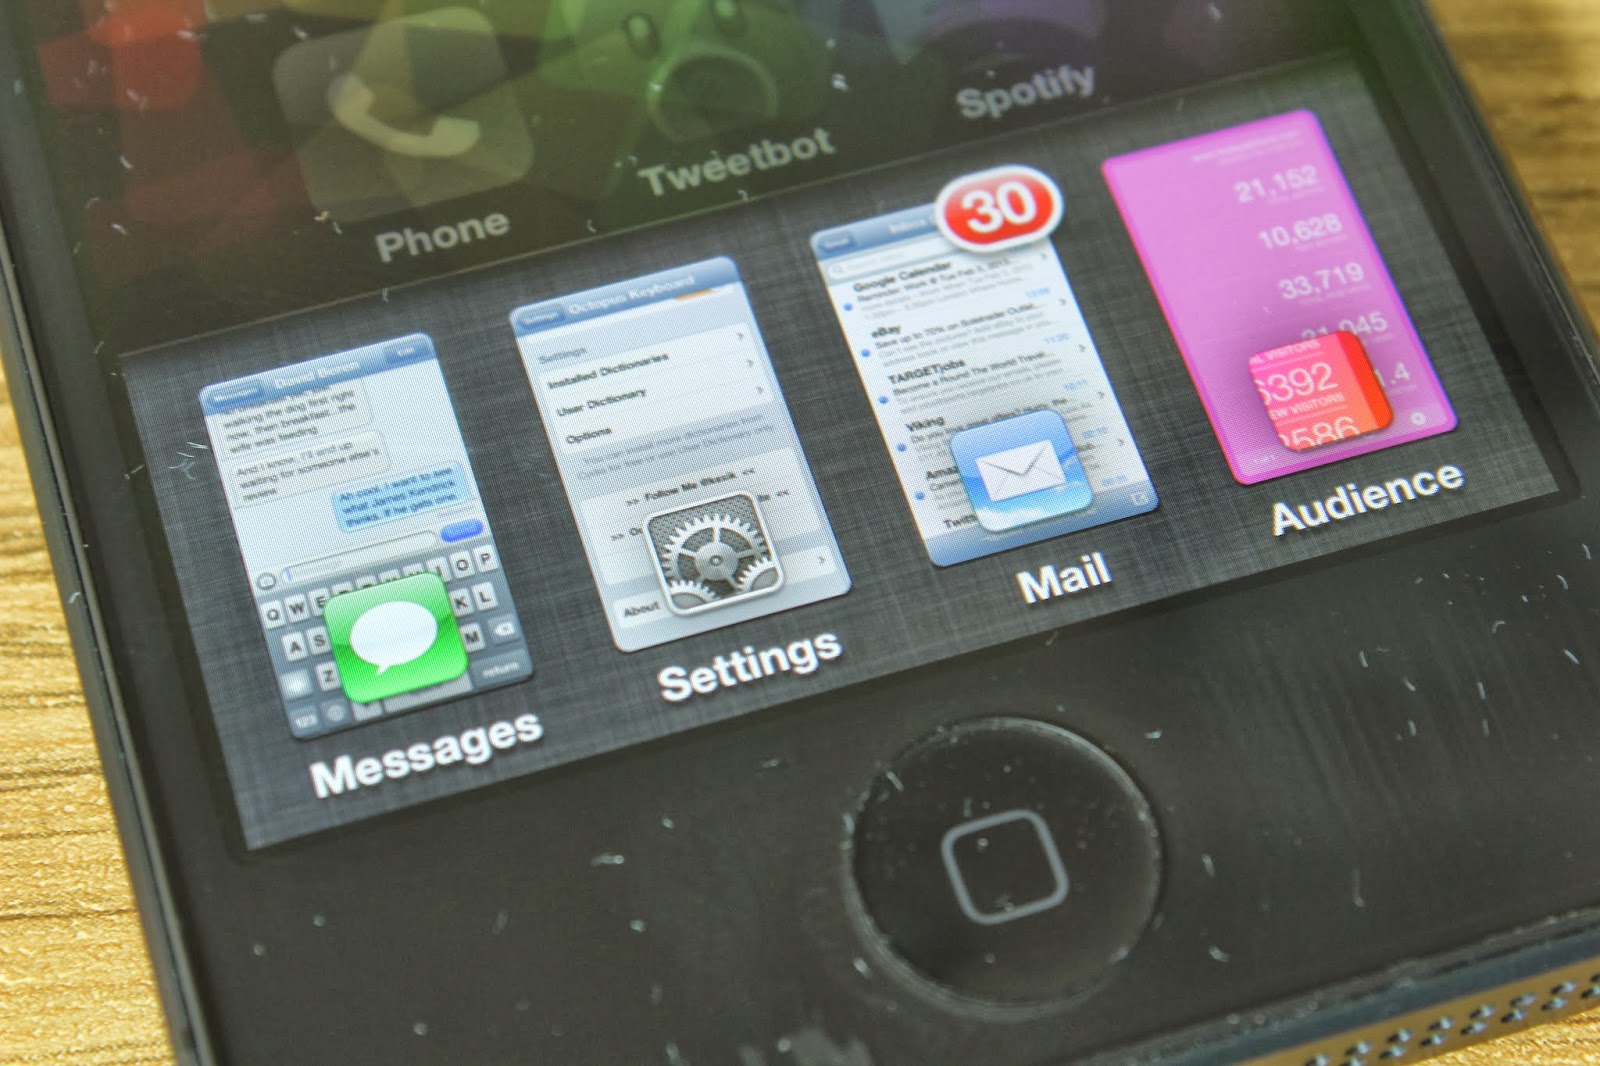 First Look At Auxo 2 For iOS 7 [Video]